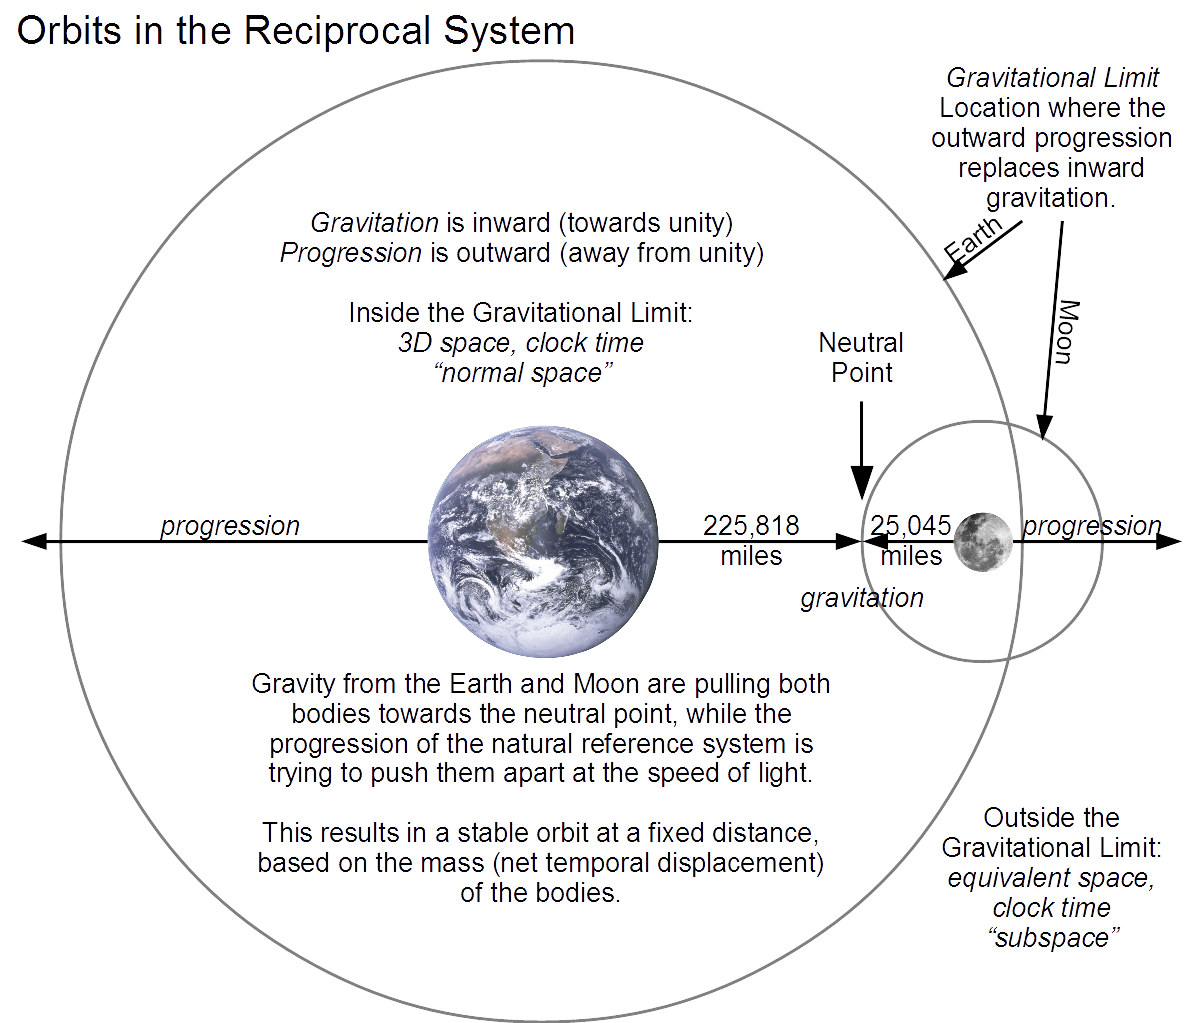 Earth-Moon System